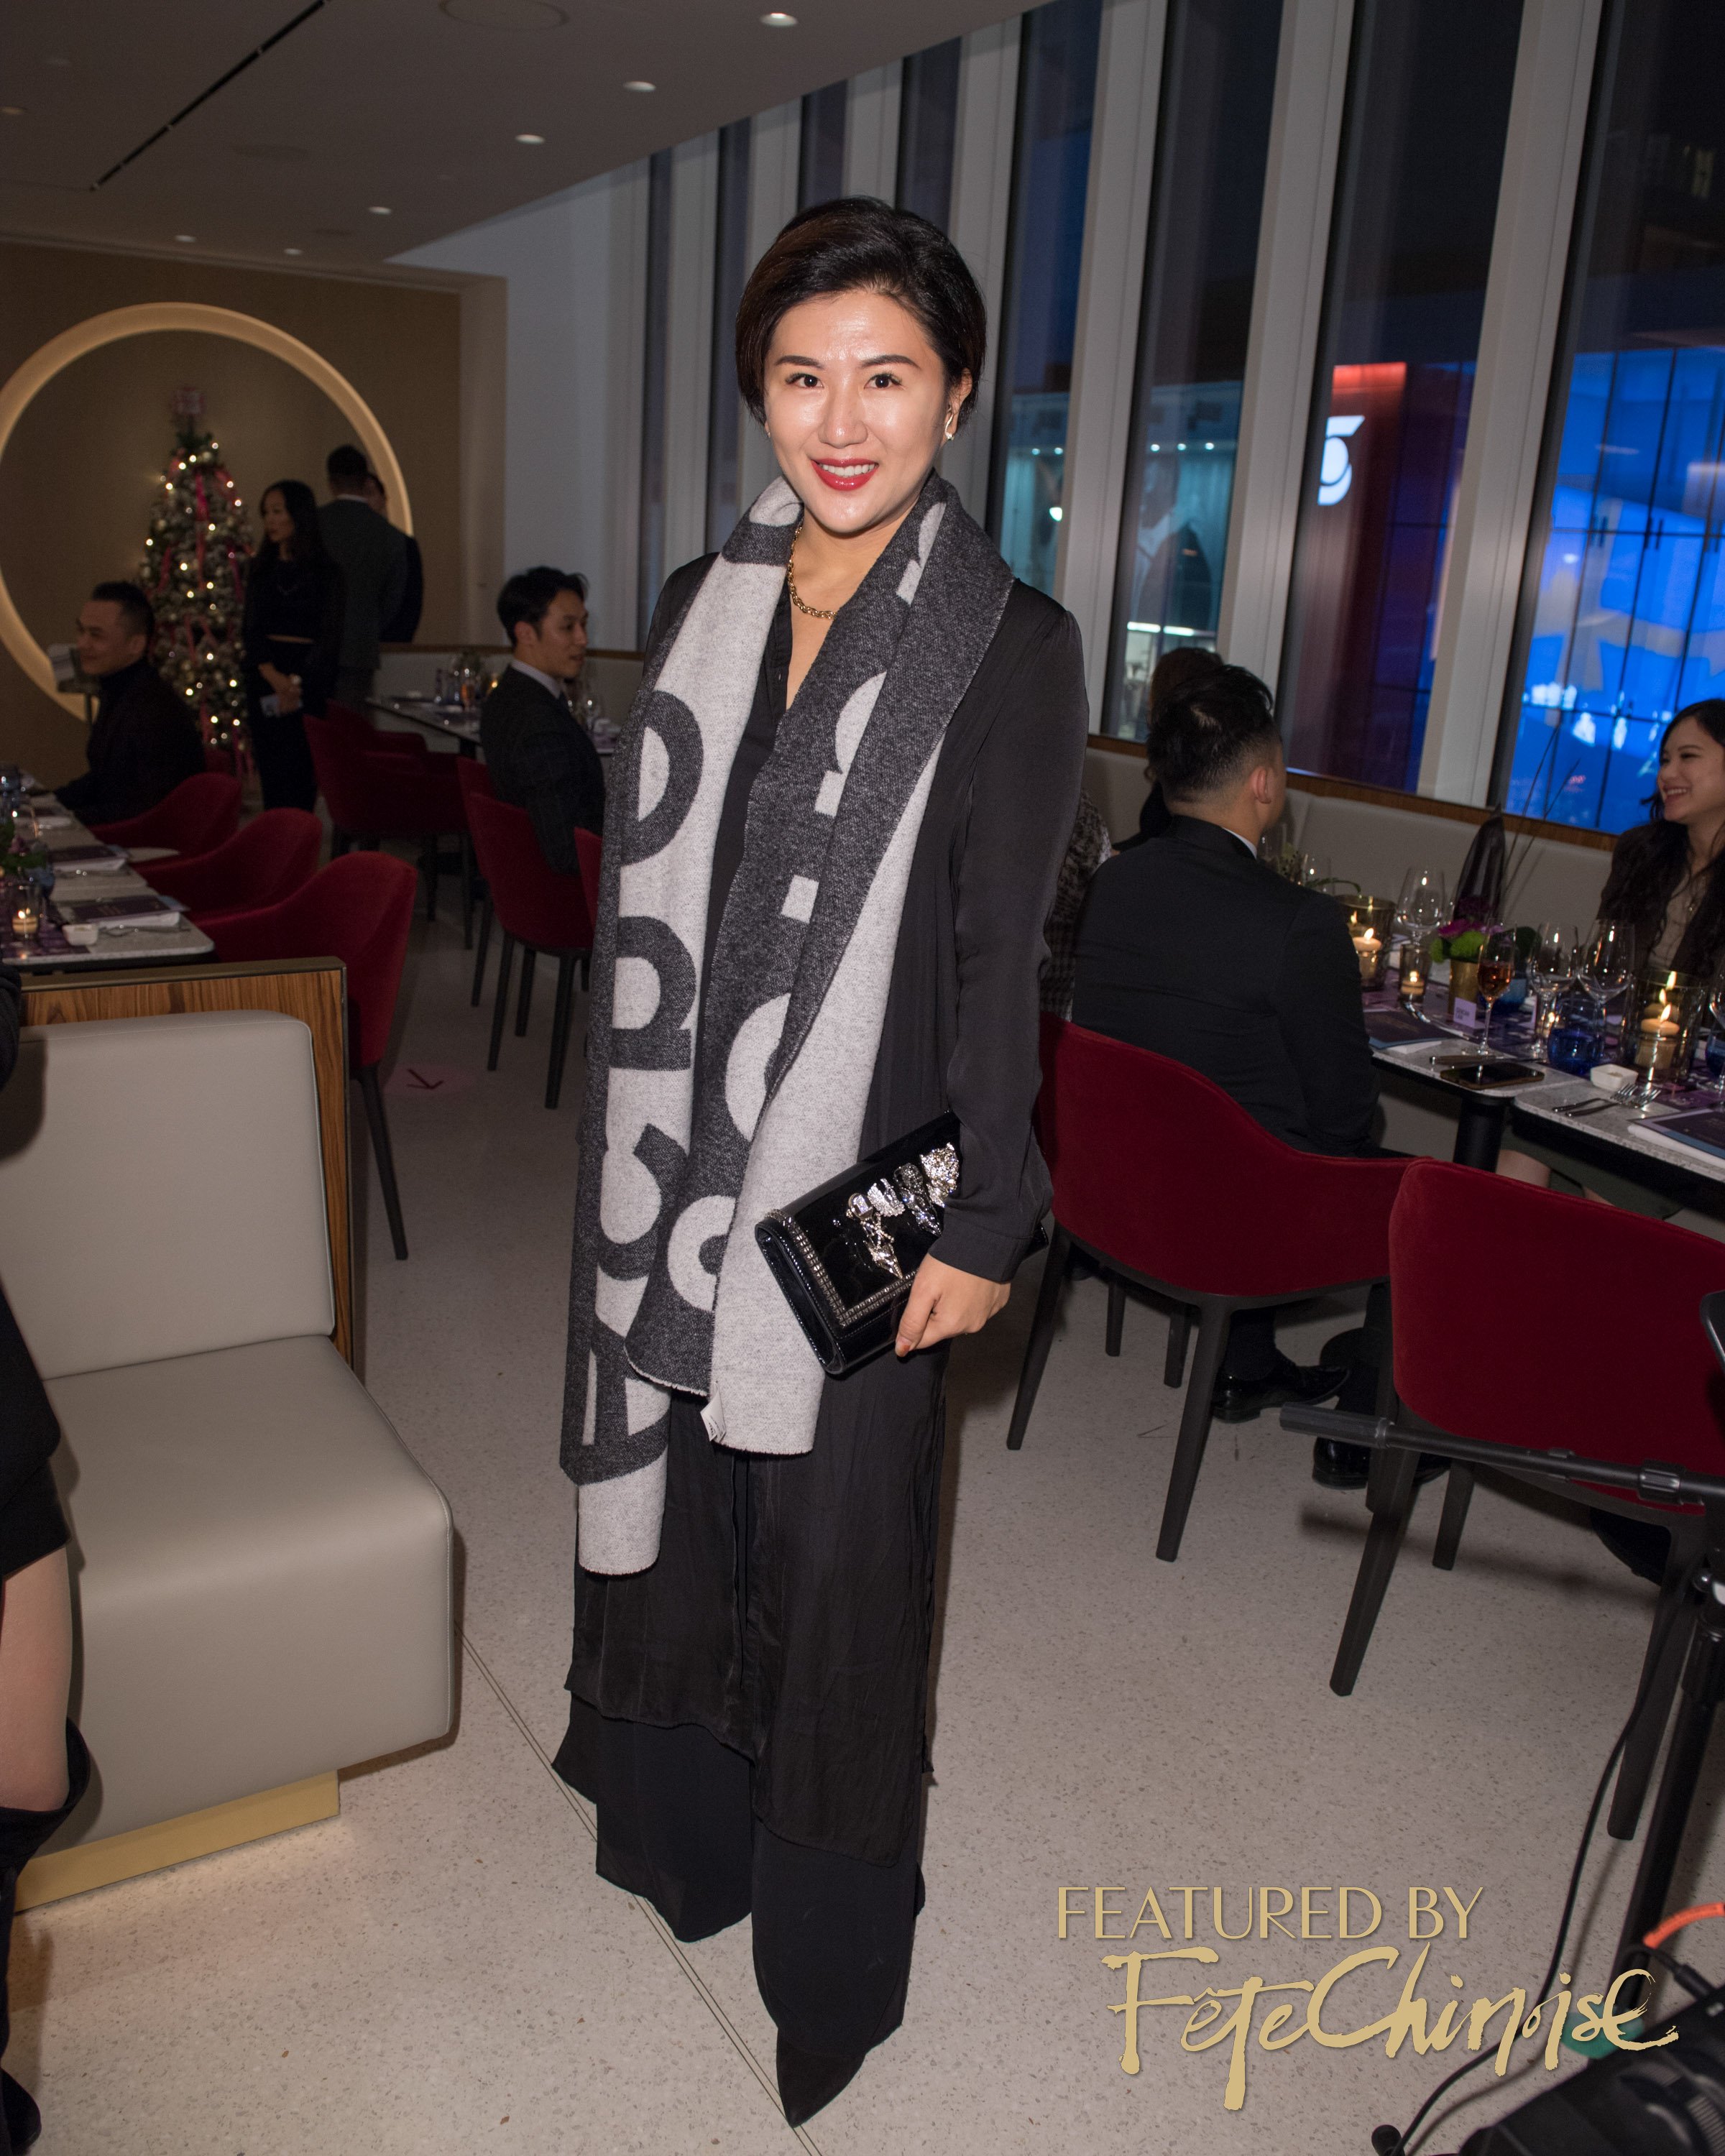 Fete-Chionise-Magaine-edition7-launch-party-holt-renfrew-photography-release-140.jpg